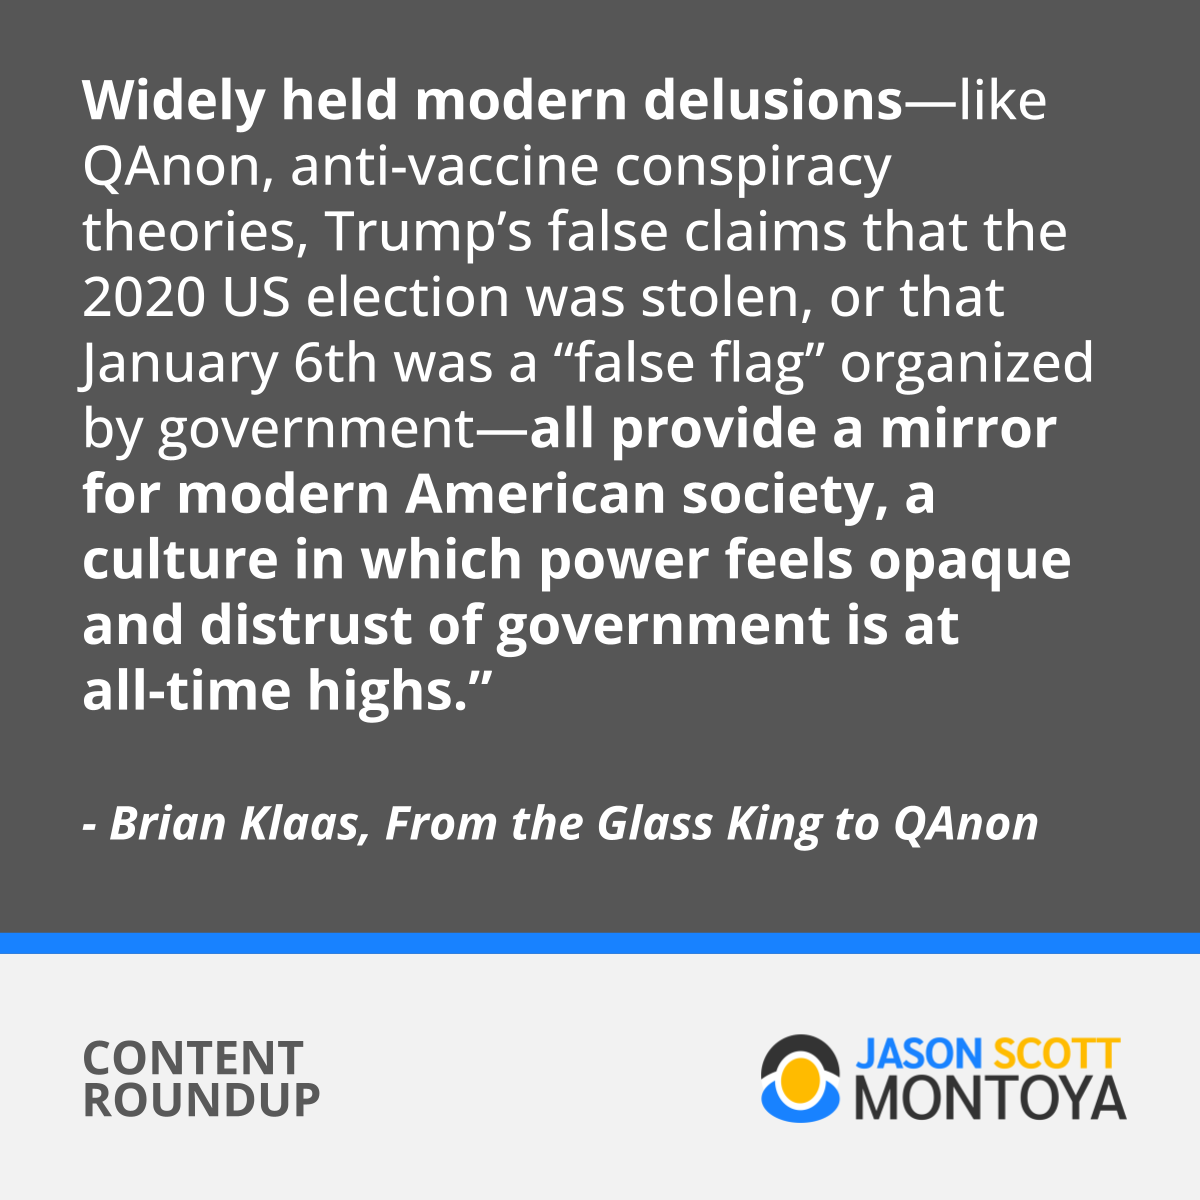 Widely held modern delusions—like QAnon, anti-vaccine conspiracy theories, Trump’s false claims that the 2020 US election was stolen, or that January 6th was a “false flag” organized by government—all provide a mirror for modern American society, a culture in which power feels opaque and distrust of government is at all-time highs.”  - Brian Klaas, From the Glass King to QAnon